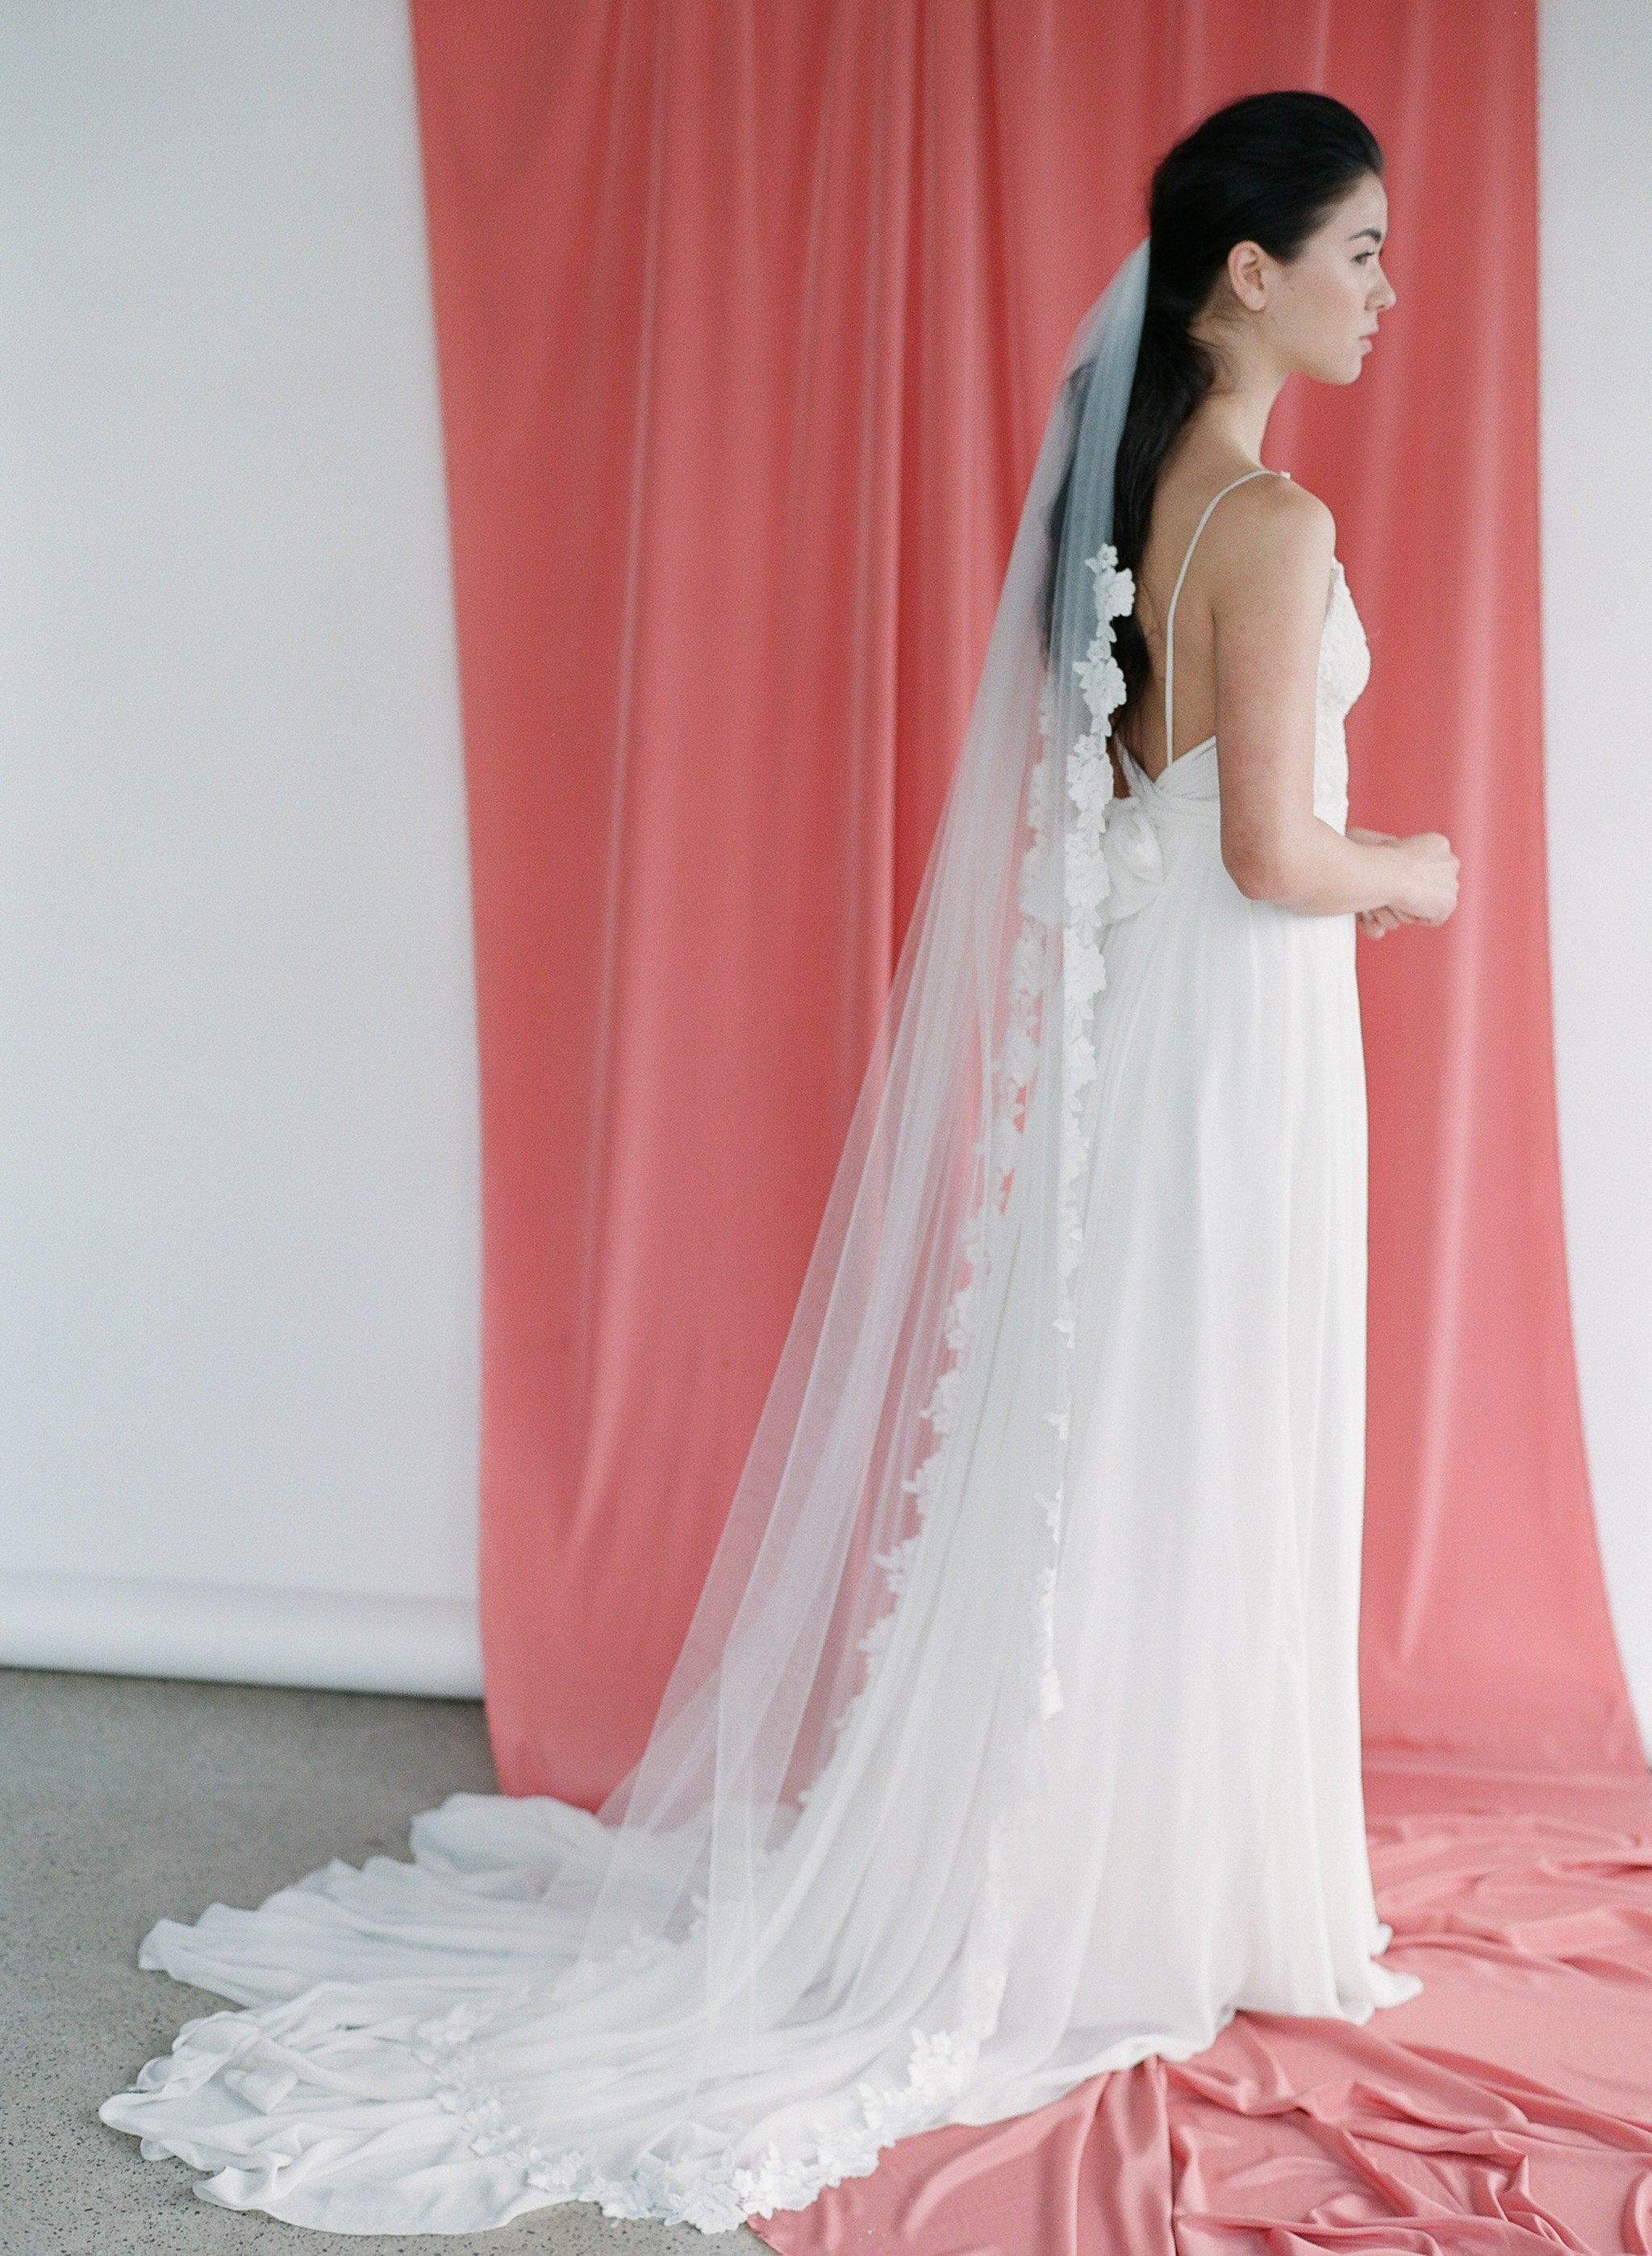 Classic tulle veil with a floral lace trim